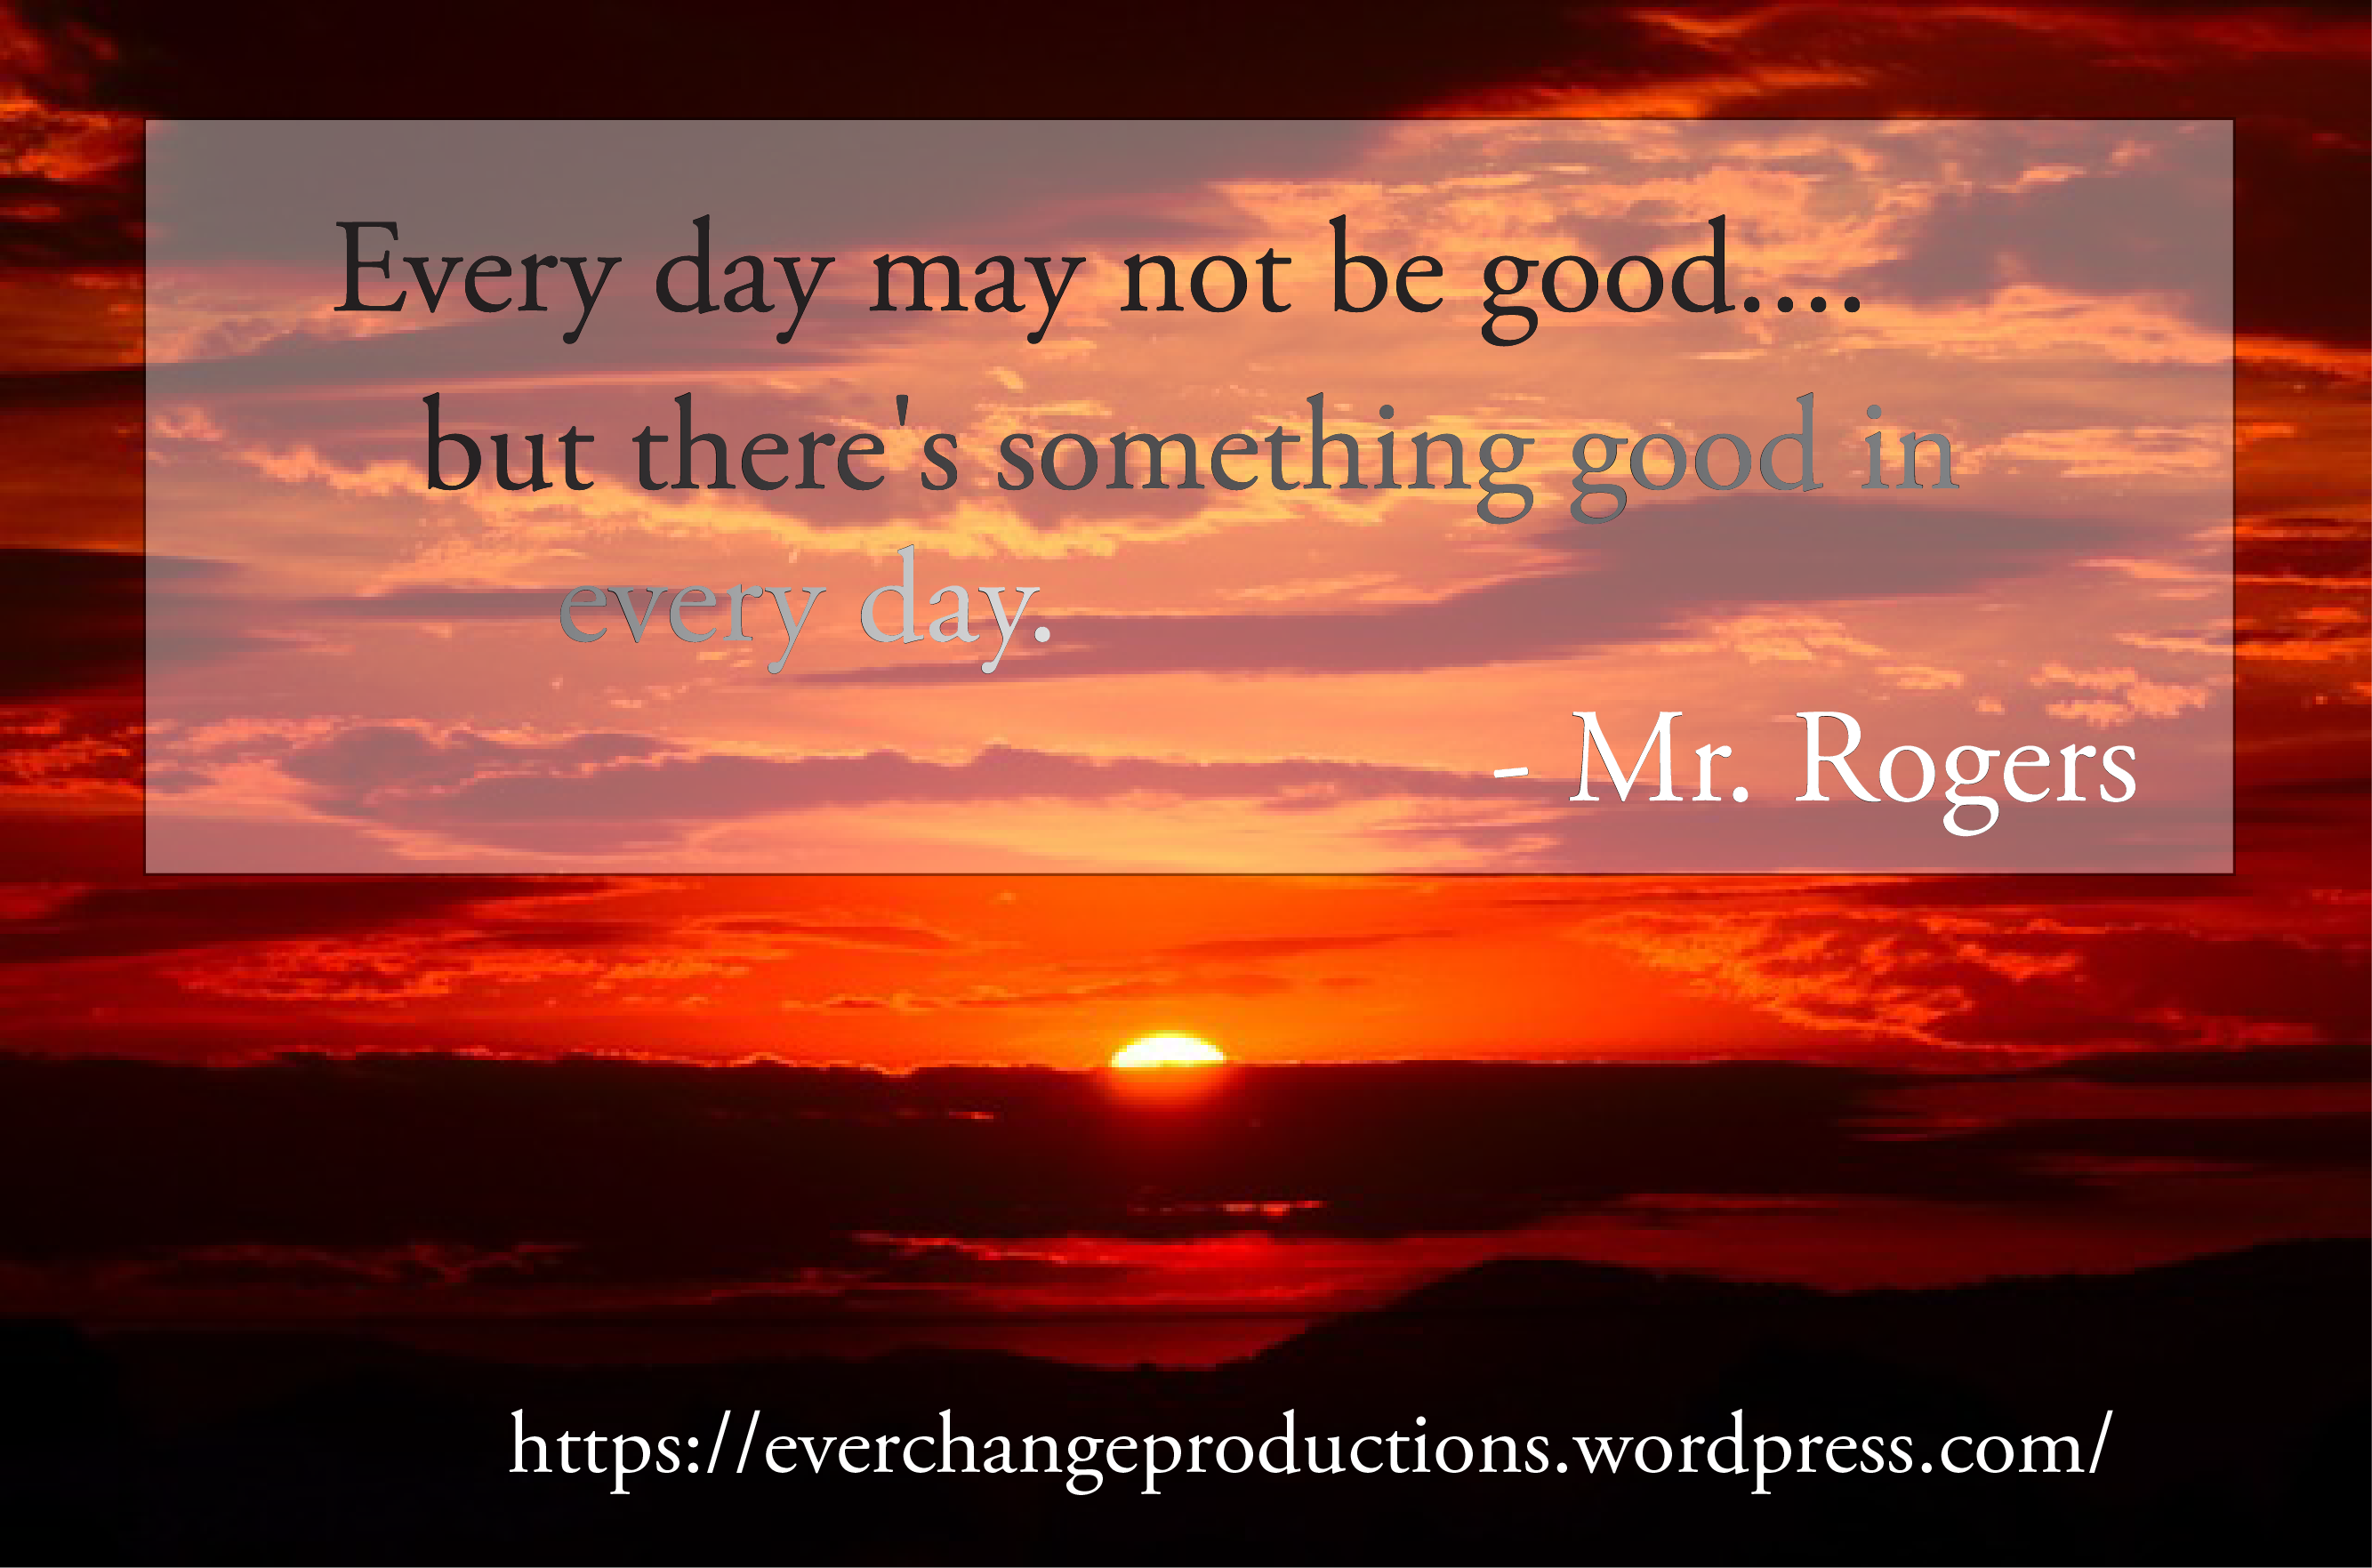 Do you need some encouragement to get you started this week? Just remember: "Every day may not be good, but there's something good in every day."- Mr. Rogers